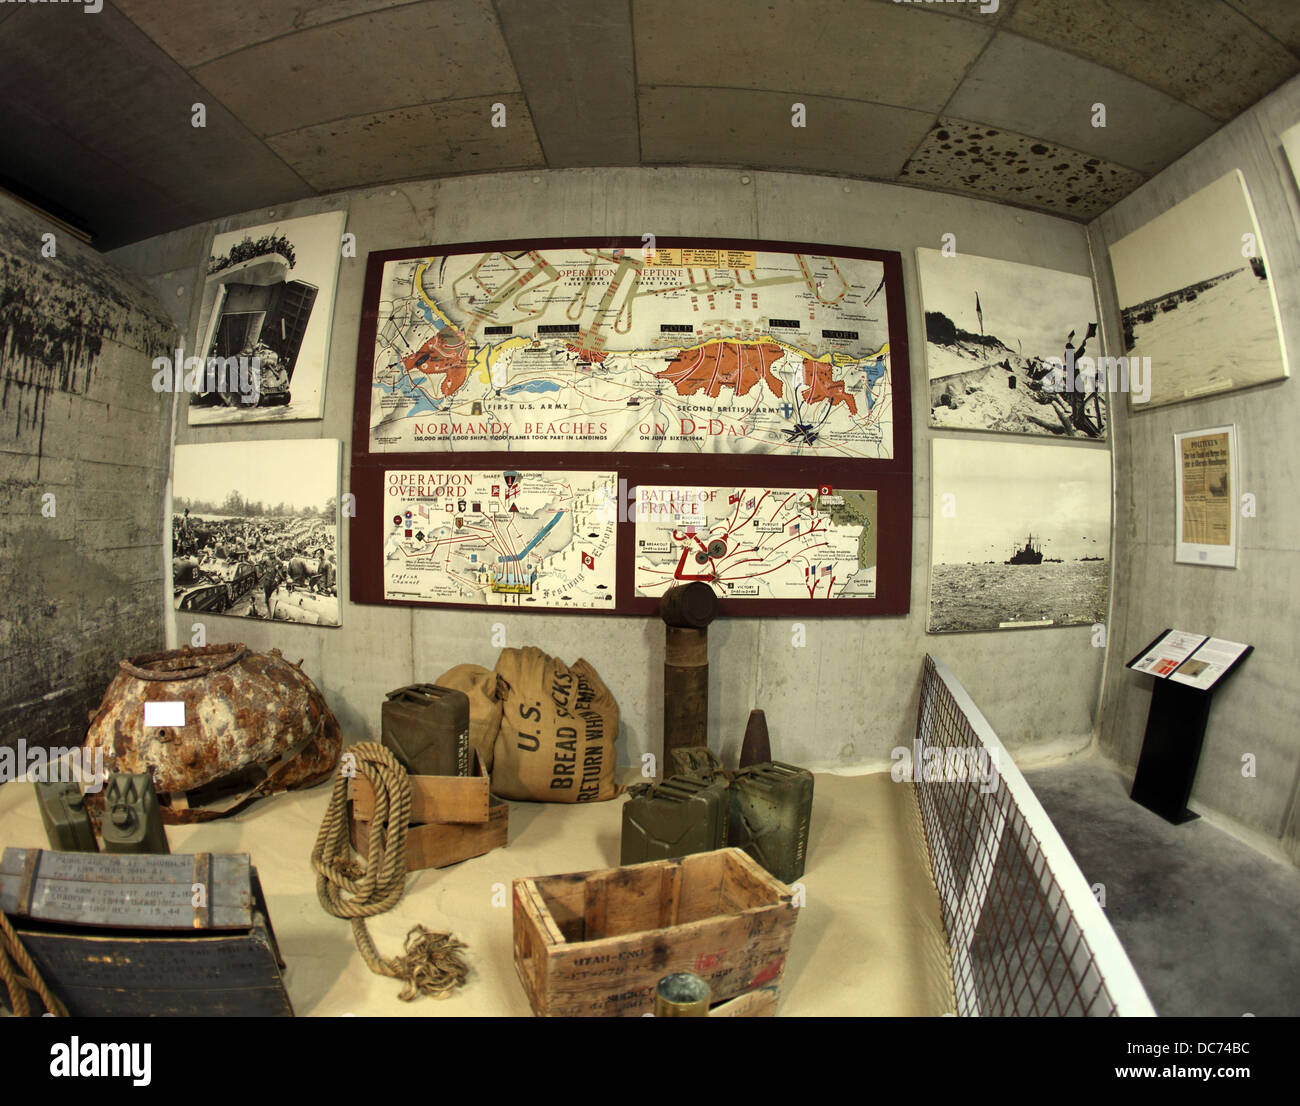 Exhibit at the Museum at Utah Beach, Normandy landings in France, Operation Overlord, D-Day. Stock Photo